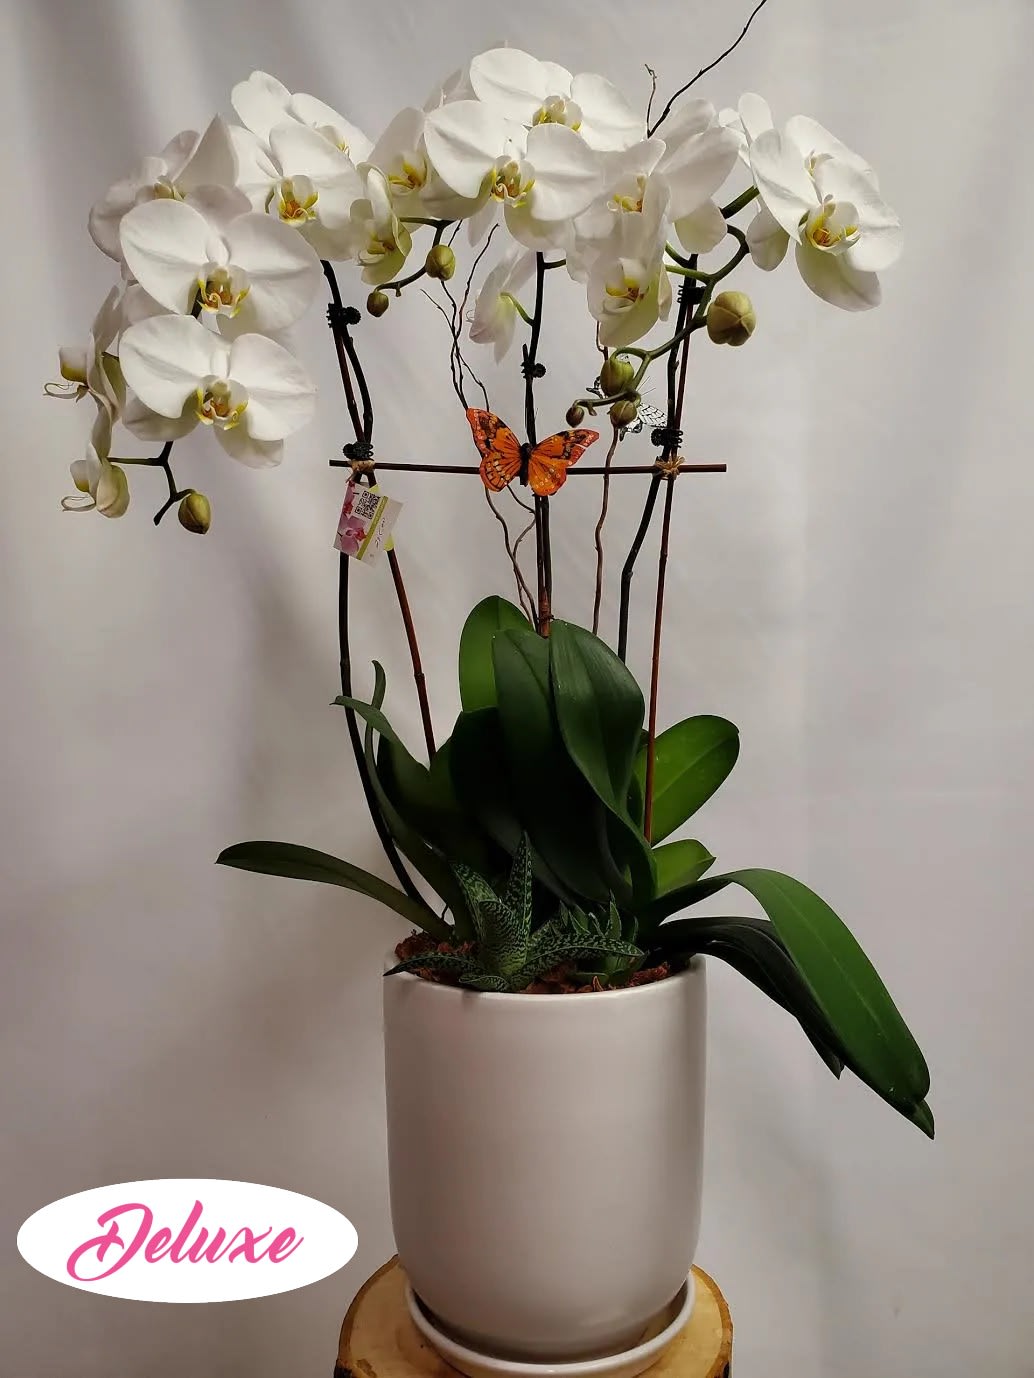 Phalaenopsis Orchid Plant - This gorgeous three stemmed white Phalaenopsis Orchid Plant is a beautiful. Arranged in a simple and elegant ceramic container it is perfect for any home or office. 